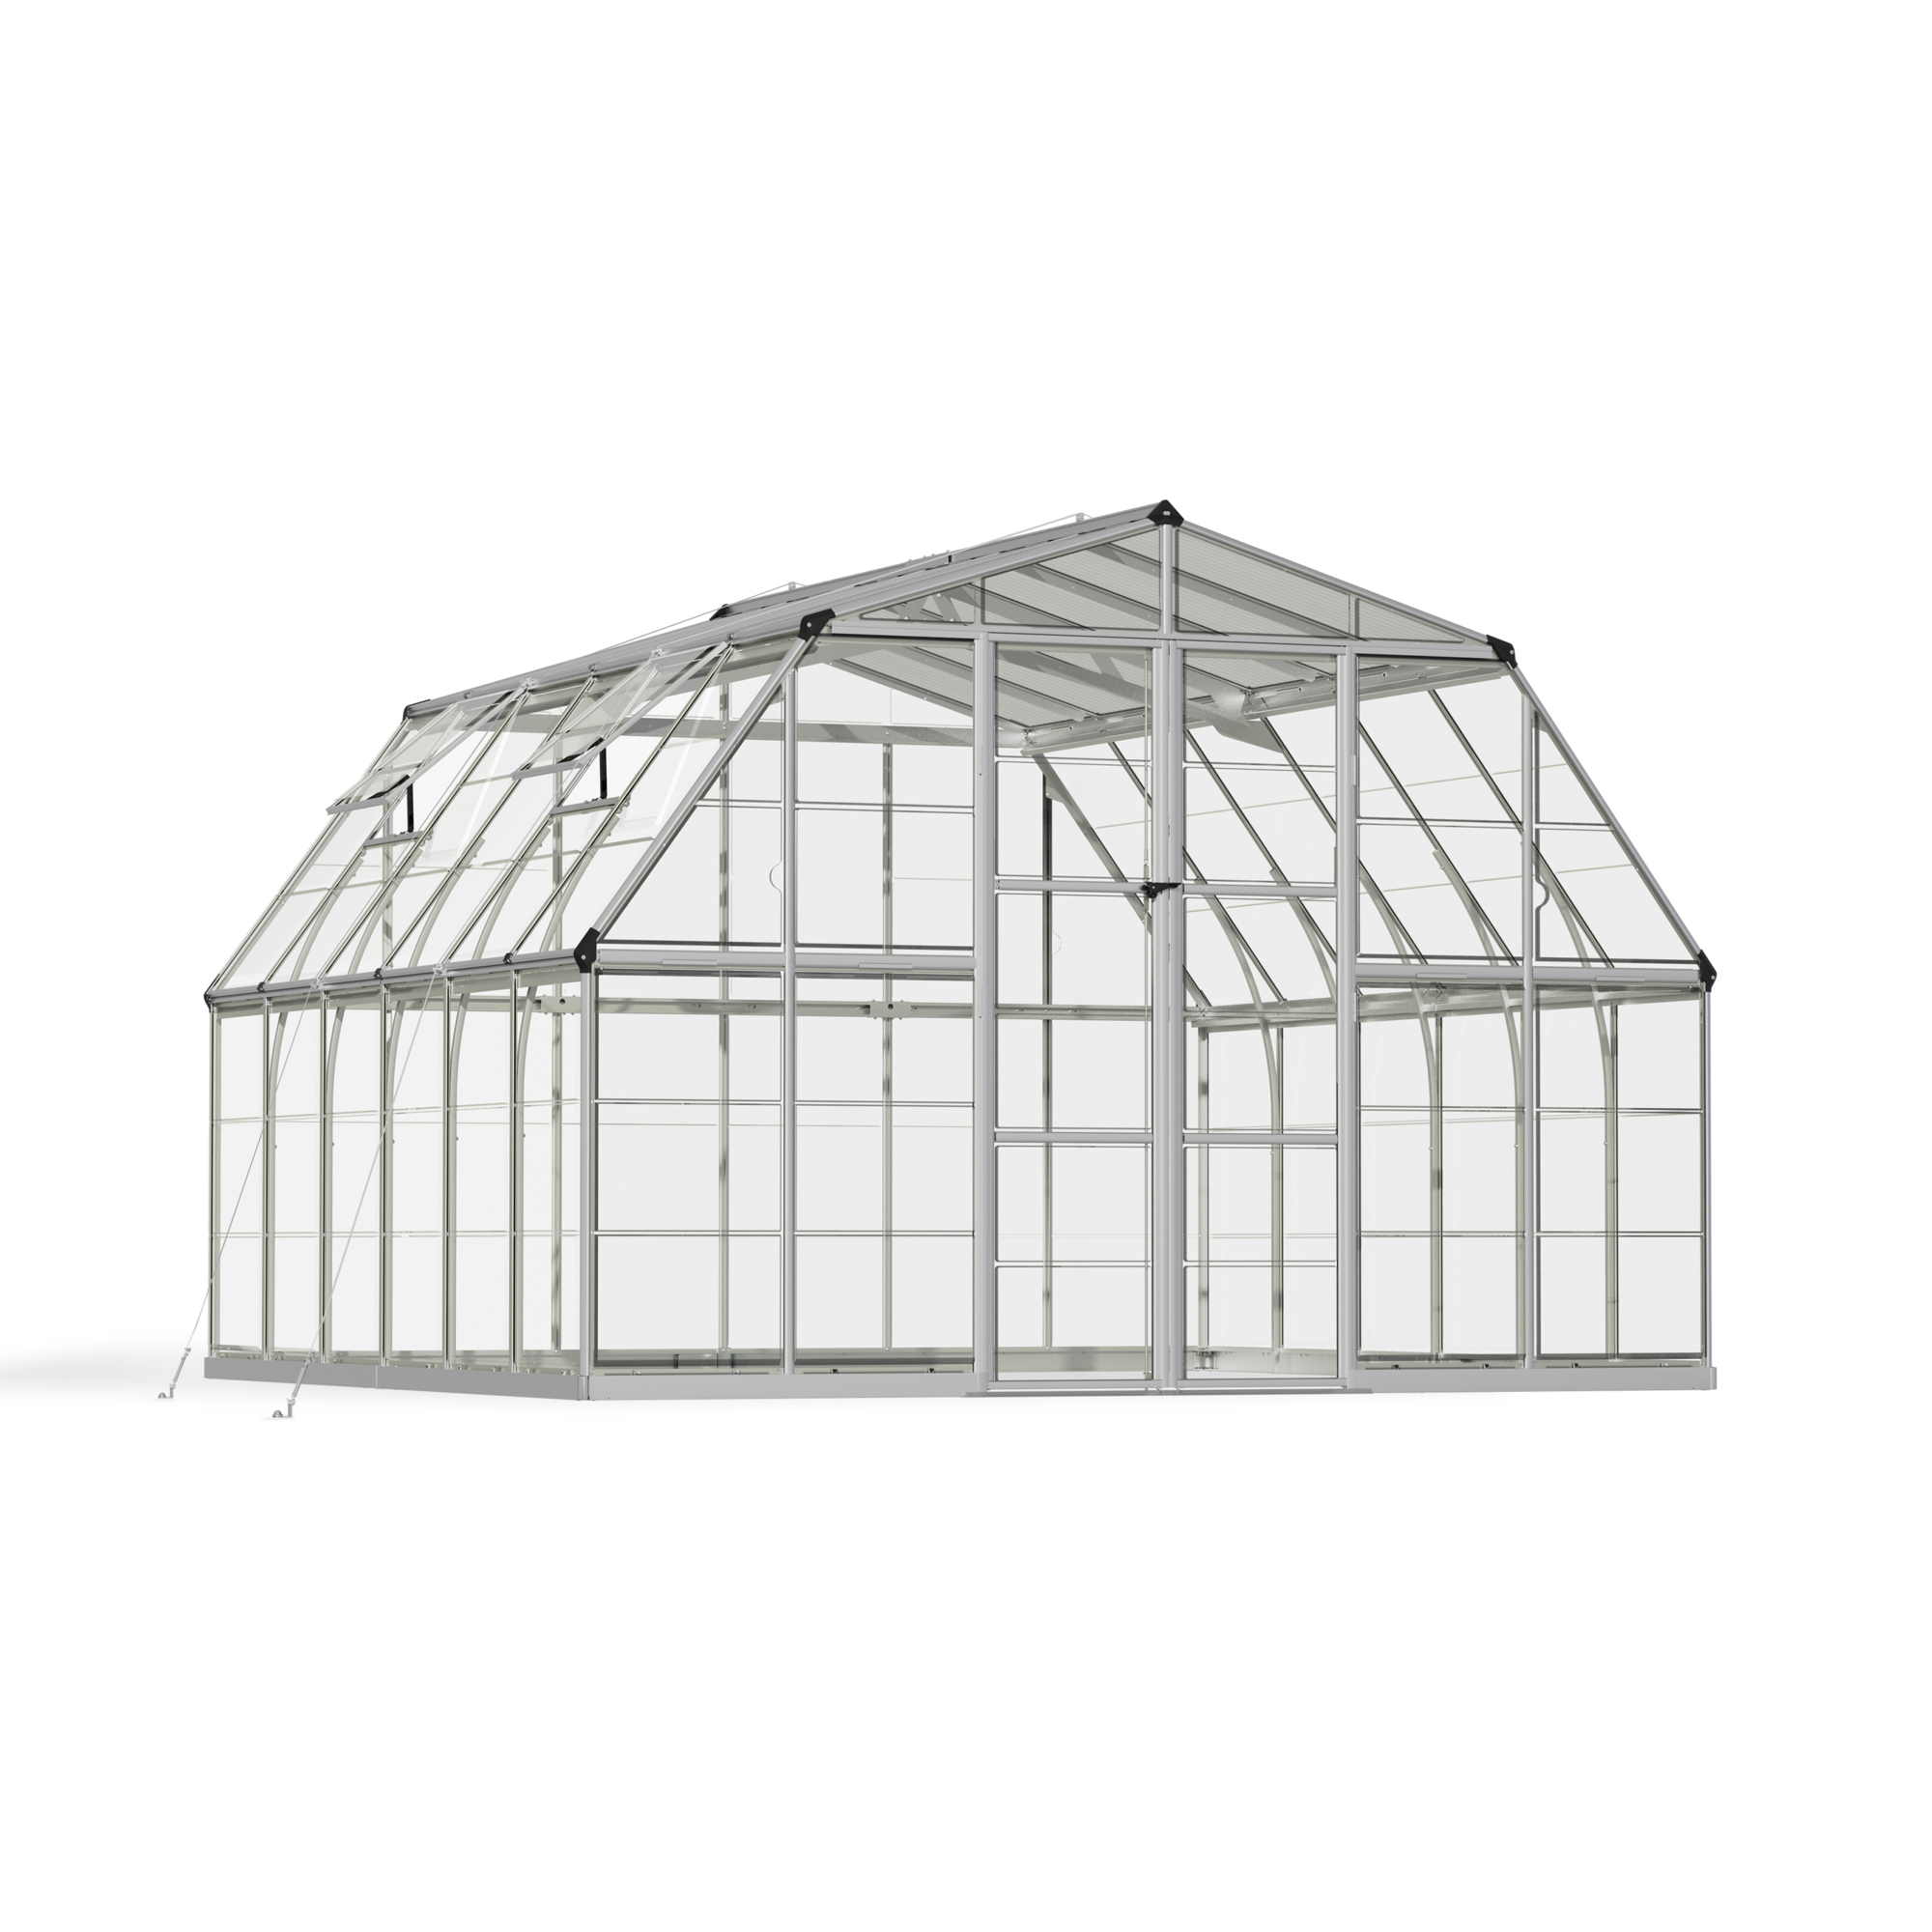 Poly-Tex Inc., Americana 12ft. x 12ft. Greenhouse, Length 143.75 in, Width 143.75 in, Center Height 103.5 in, Model 702284